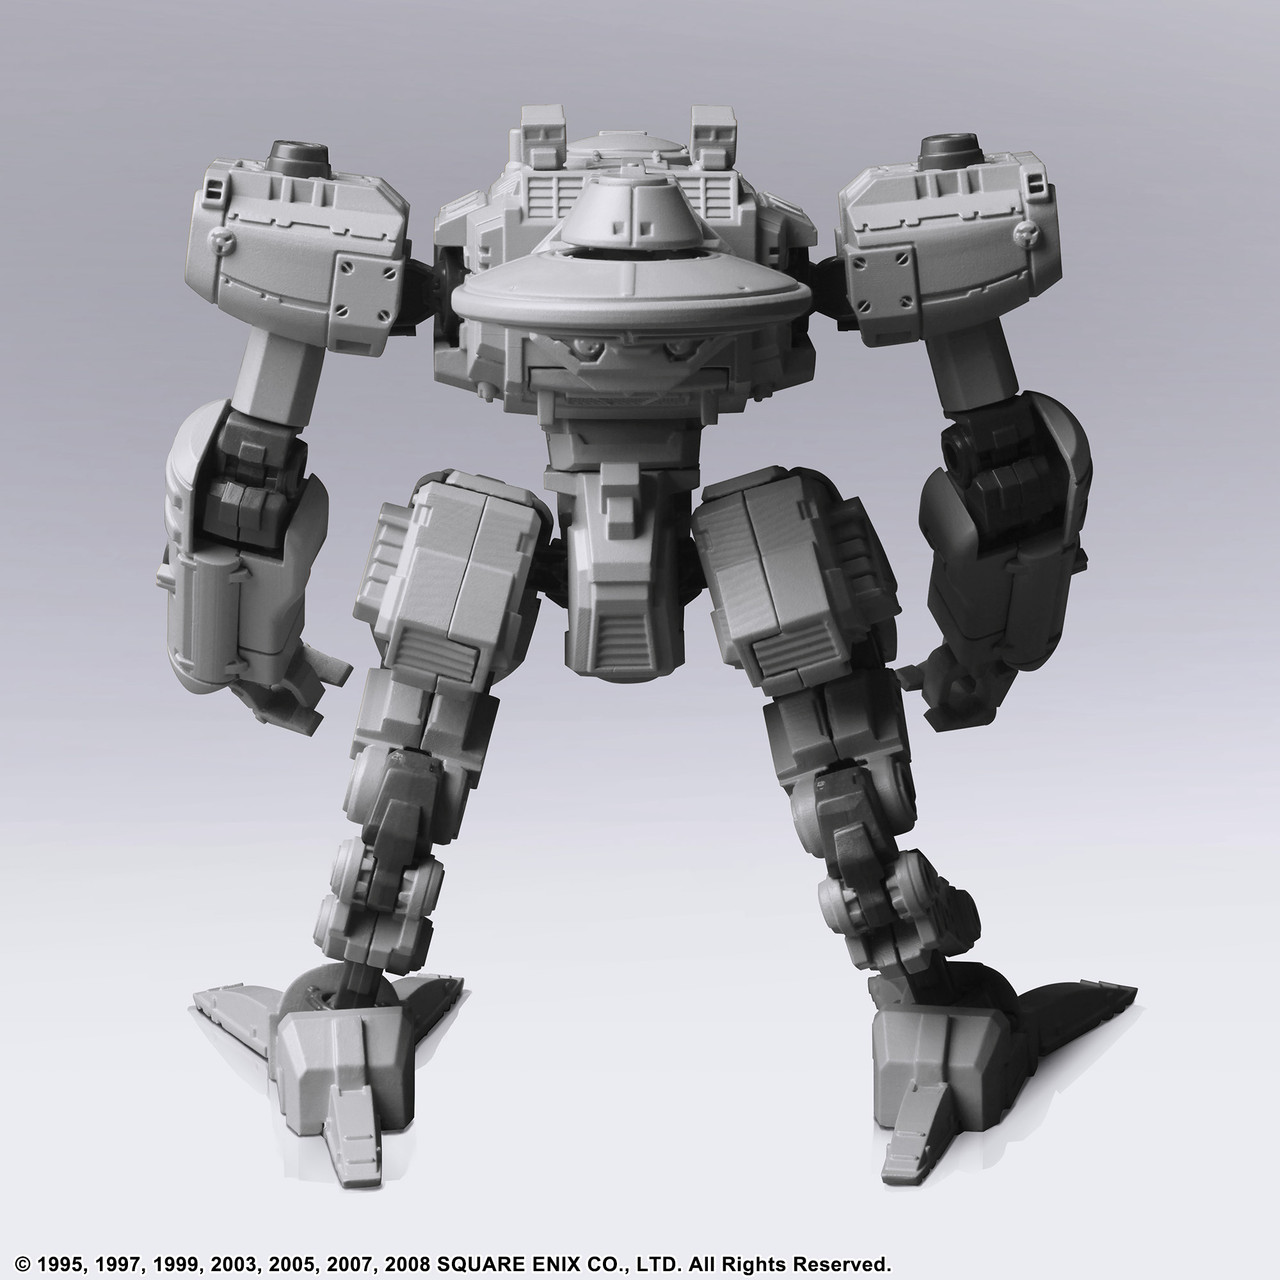 Live A Live' Steel Titan Plastic Model Kit Available For Pre-Order Via  North American Square Enix Store; October 2022 Release - Noisy Pixel